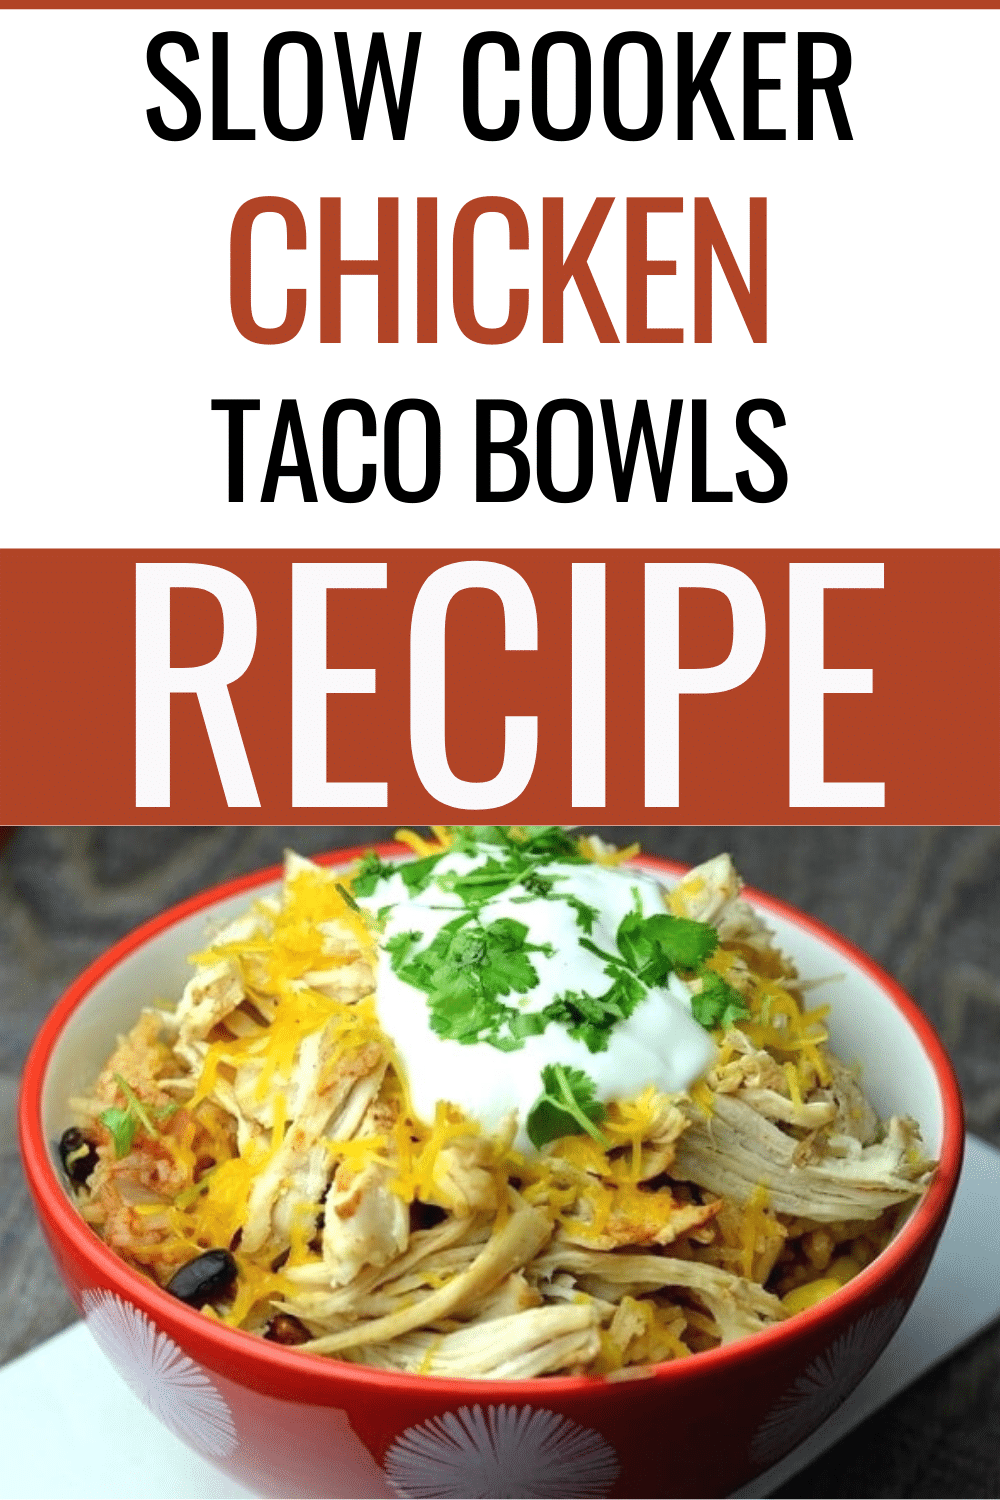 These chicken taco bowls are super easy to make in an Instant Pot or slow cooker. If you love Tex Mex, you probably have all the ingredients on hand! #instantpot #slowcooker #chicken #taco via @wondermomwannab